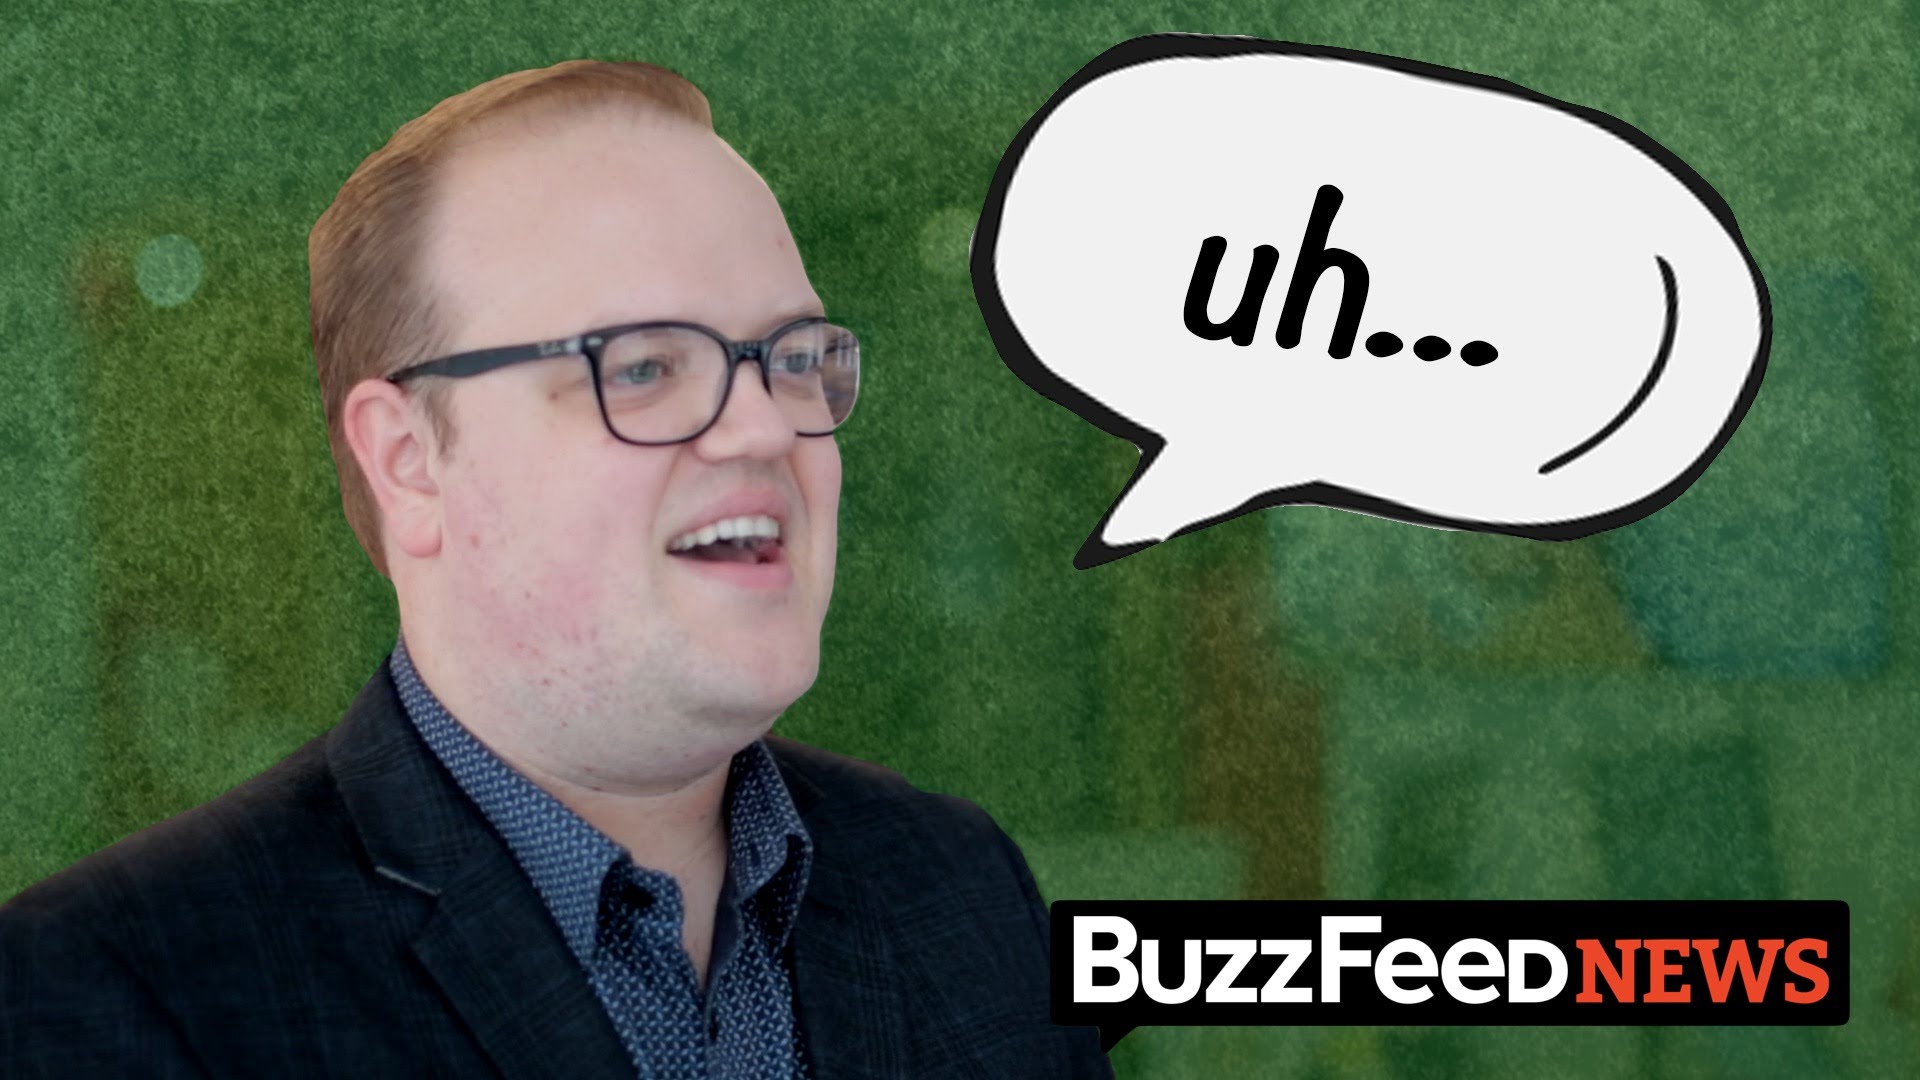 SICK! BuzzFeed editors caught laughing it up about murdering President Trump… cheering it on and hoping it would happen